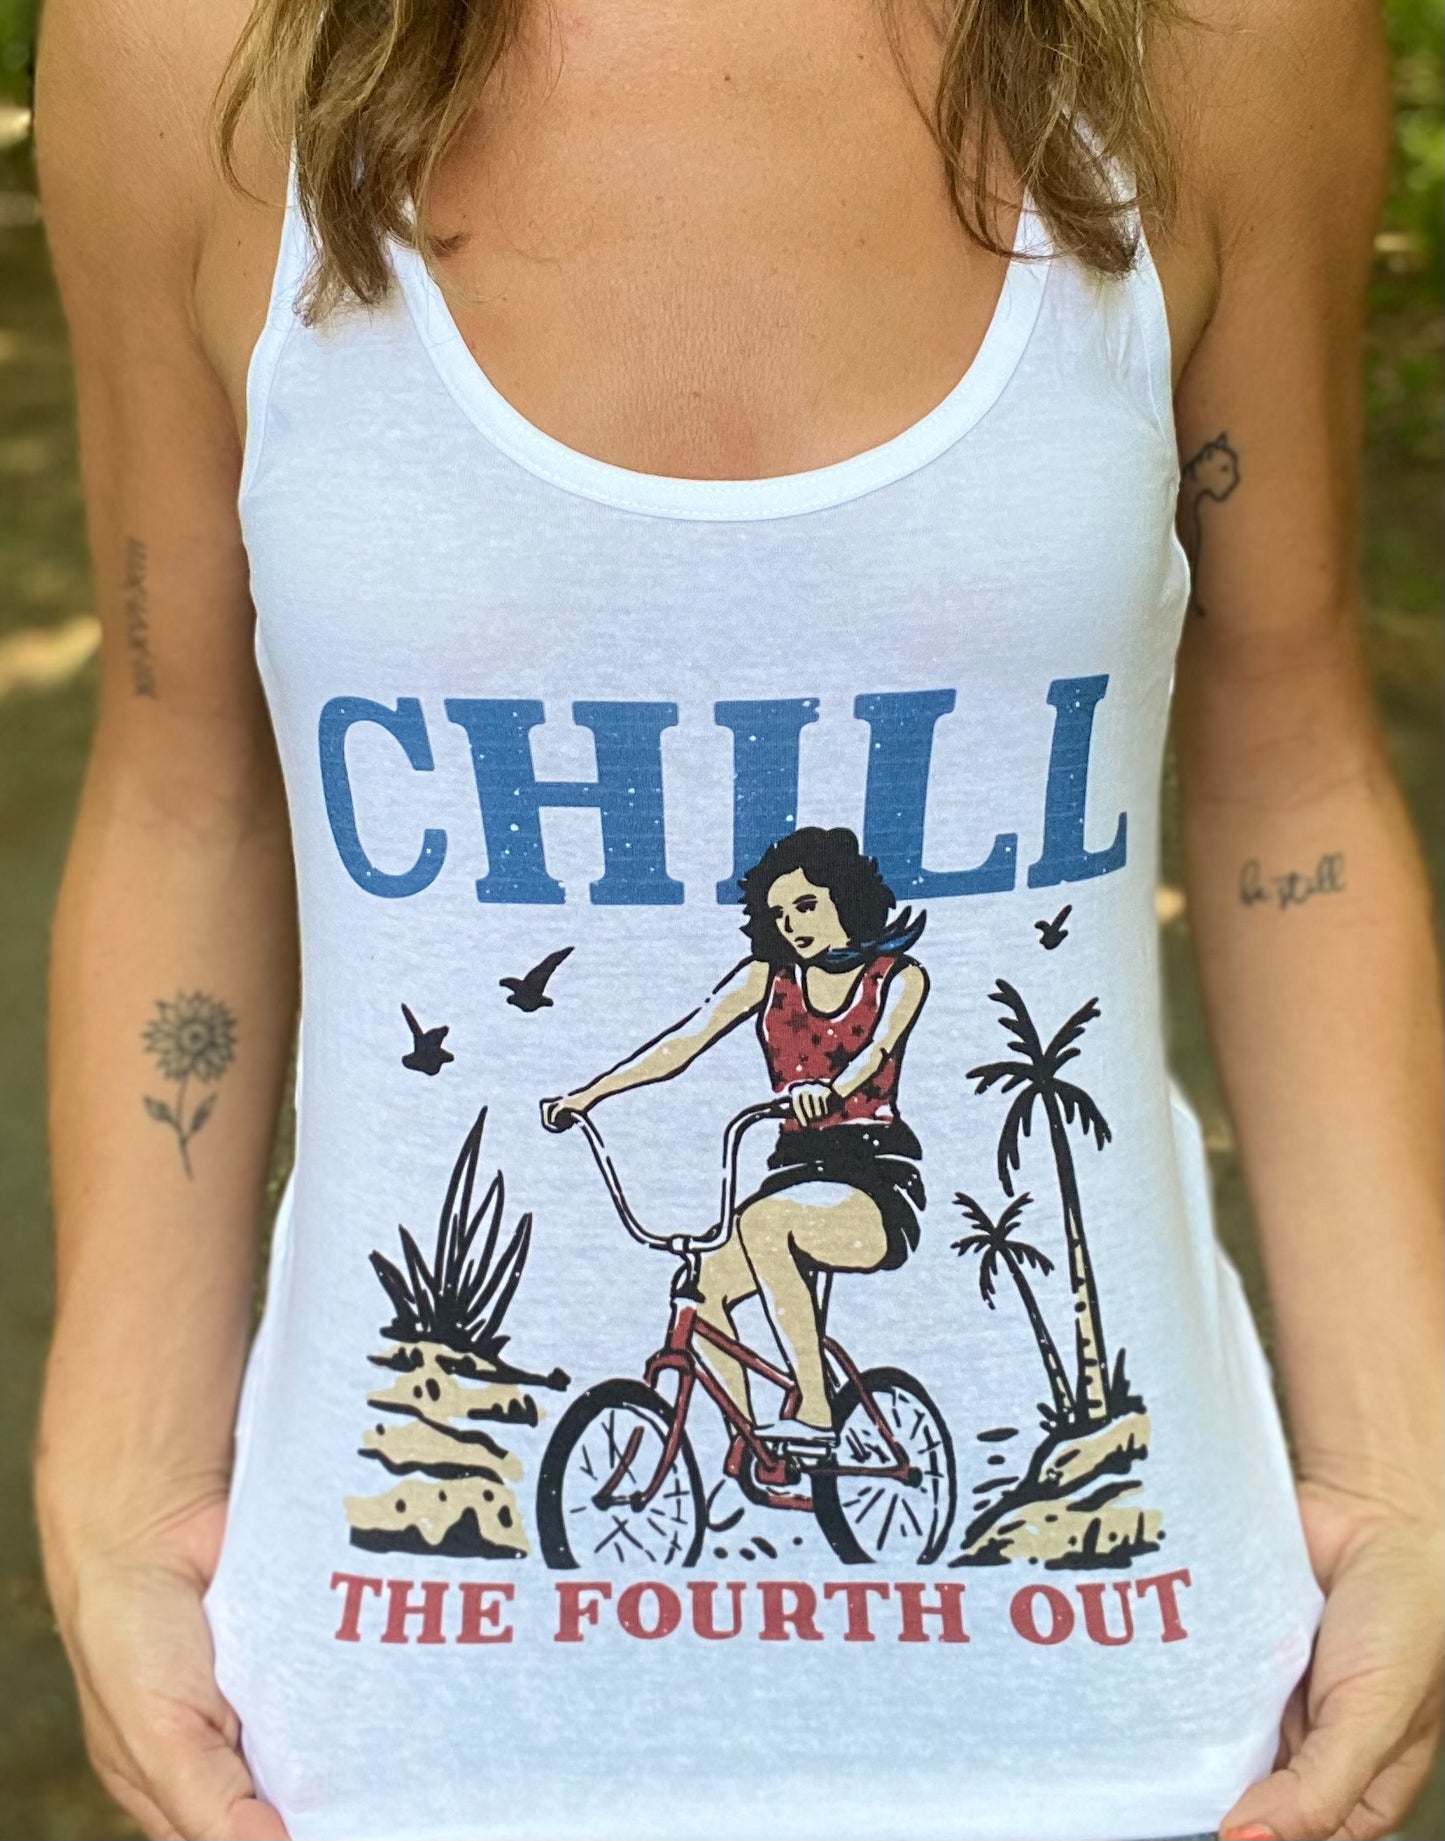 Chill The Fourth Out!